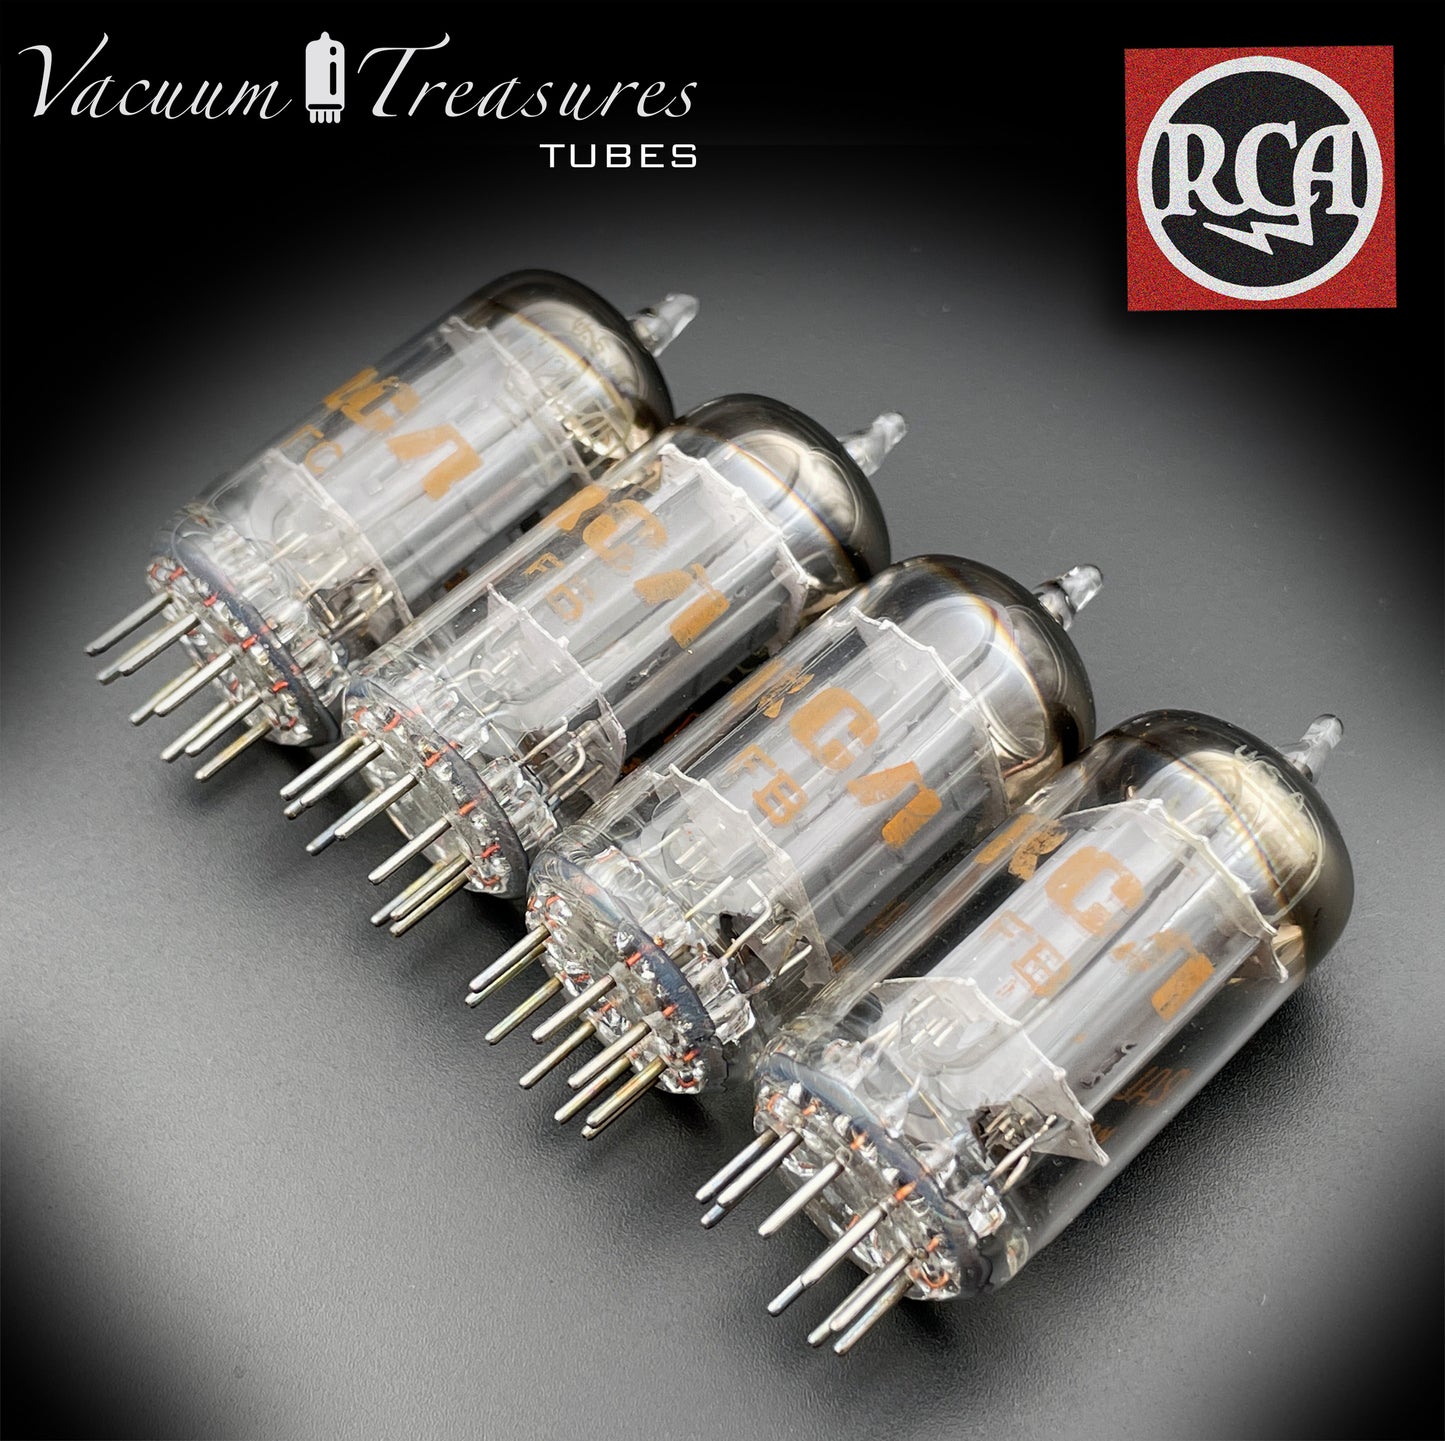 12AU7 A ( ECC82 ) RCA Long Gray Plates Halo Getter Matched Tubes Made in USA